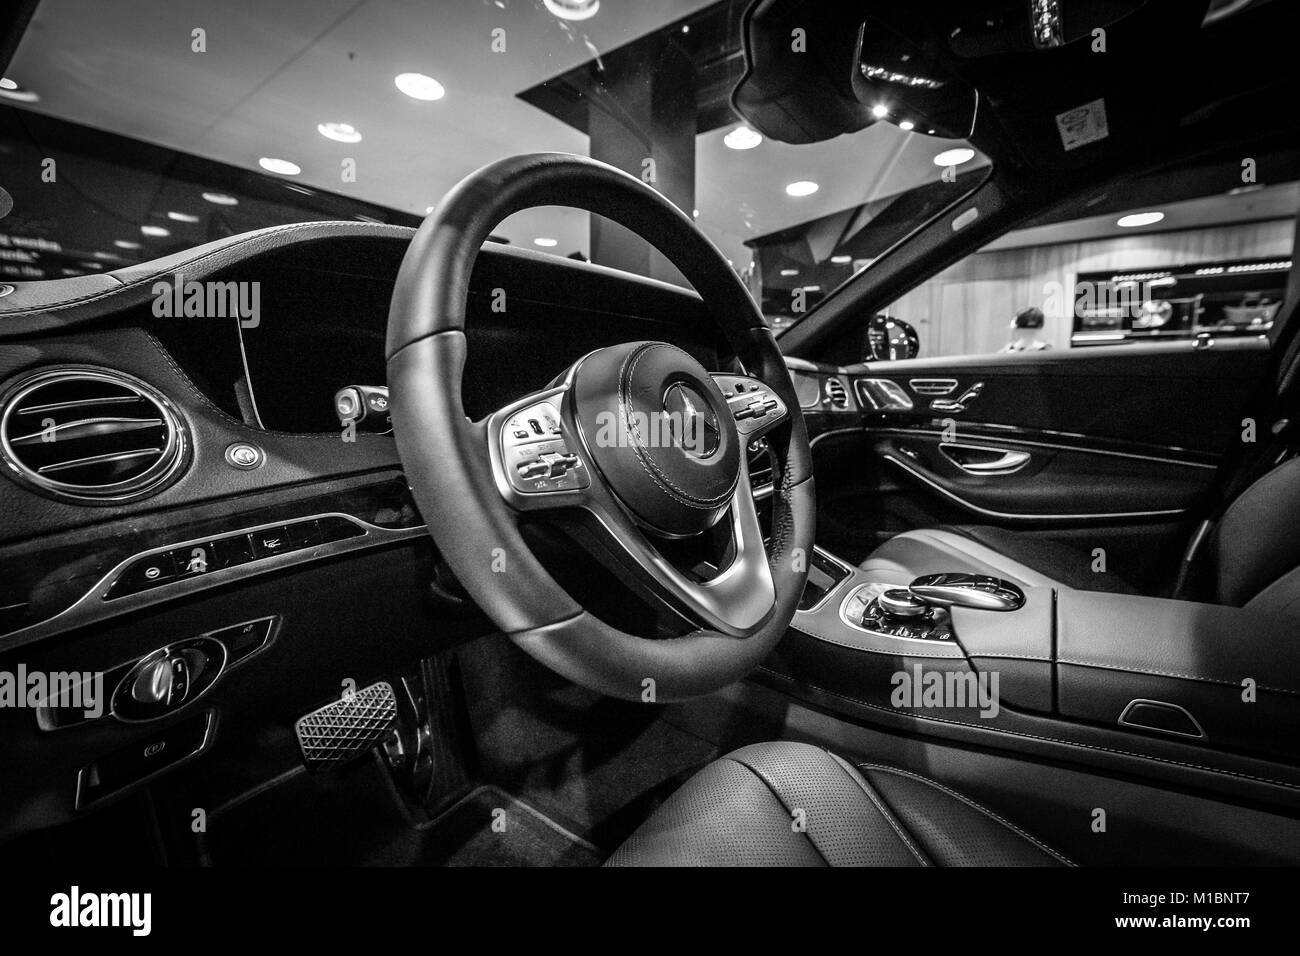 BERLIN - DECEMBER 21, 2017: Showroom. Interior of the full-size luxury car  Mercedes-Benz S-Class S350d (W222 Facelift). Black and white. Since 2017  Stock Photo - Alamy